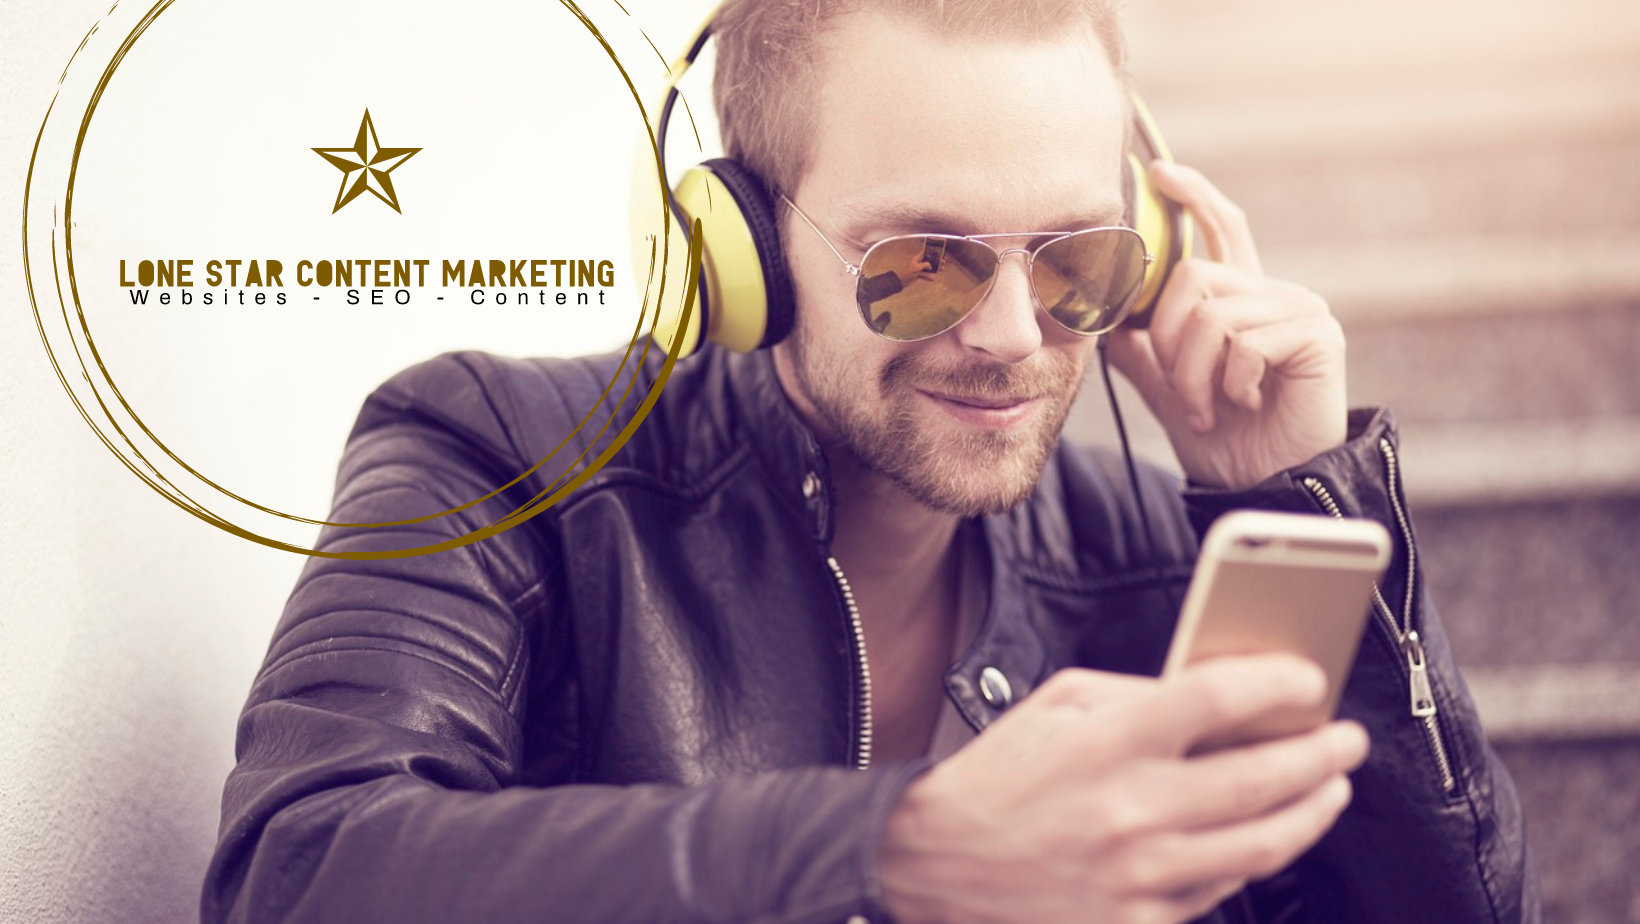 People Love Listening to Lawyer Podcasts and We Create and Manage Your Podcast Channel at Lone Star Content Marketing